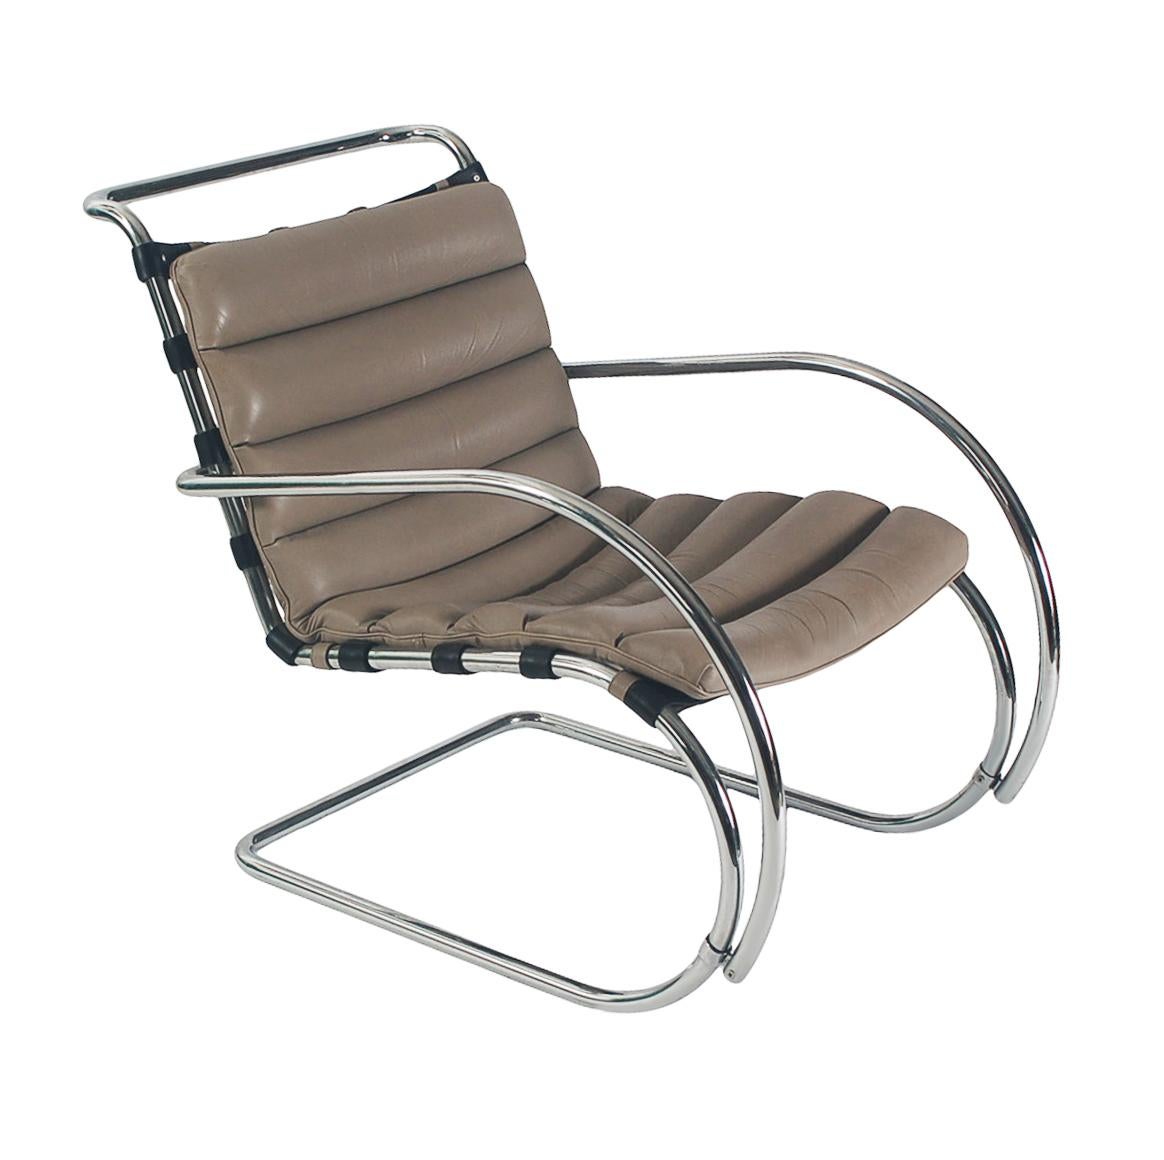 A lovely classic pair MR lounge chairs designed by Mies van der Rohe and produced by Stendig circa 1970's These feature chromed steel cantilever chair frames with gray leather seat cushions and black buckle straps. Manufacturers labels. Nice clean